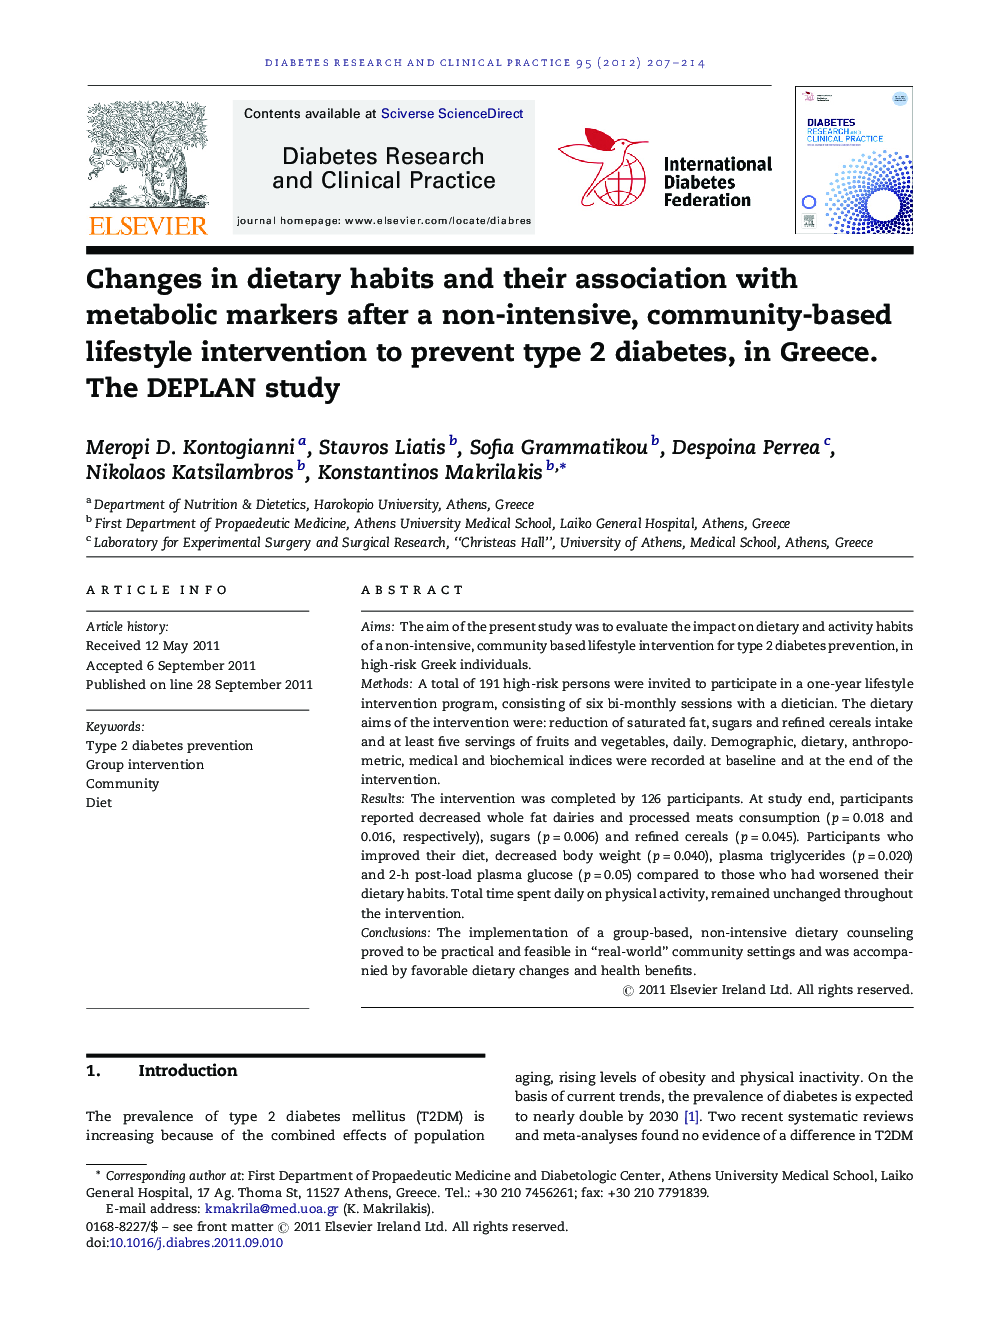 Changes in dietary habits and their association with metabolic markers after a non-intensive, community-based lifestyle intervention to prevent type 2 diabetes, in Greece. The DEPLAN study